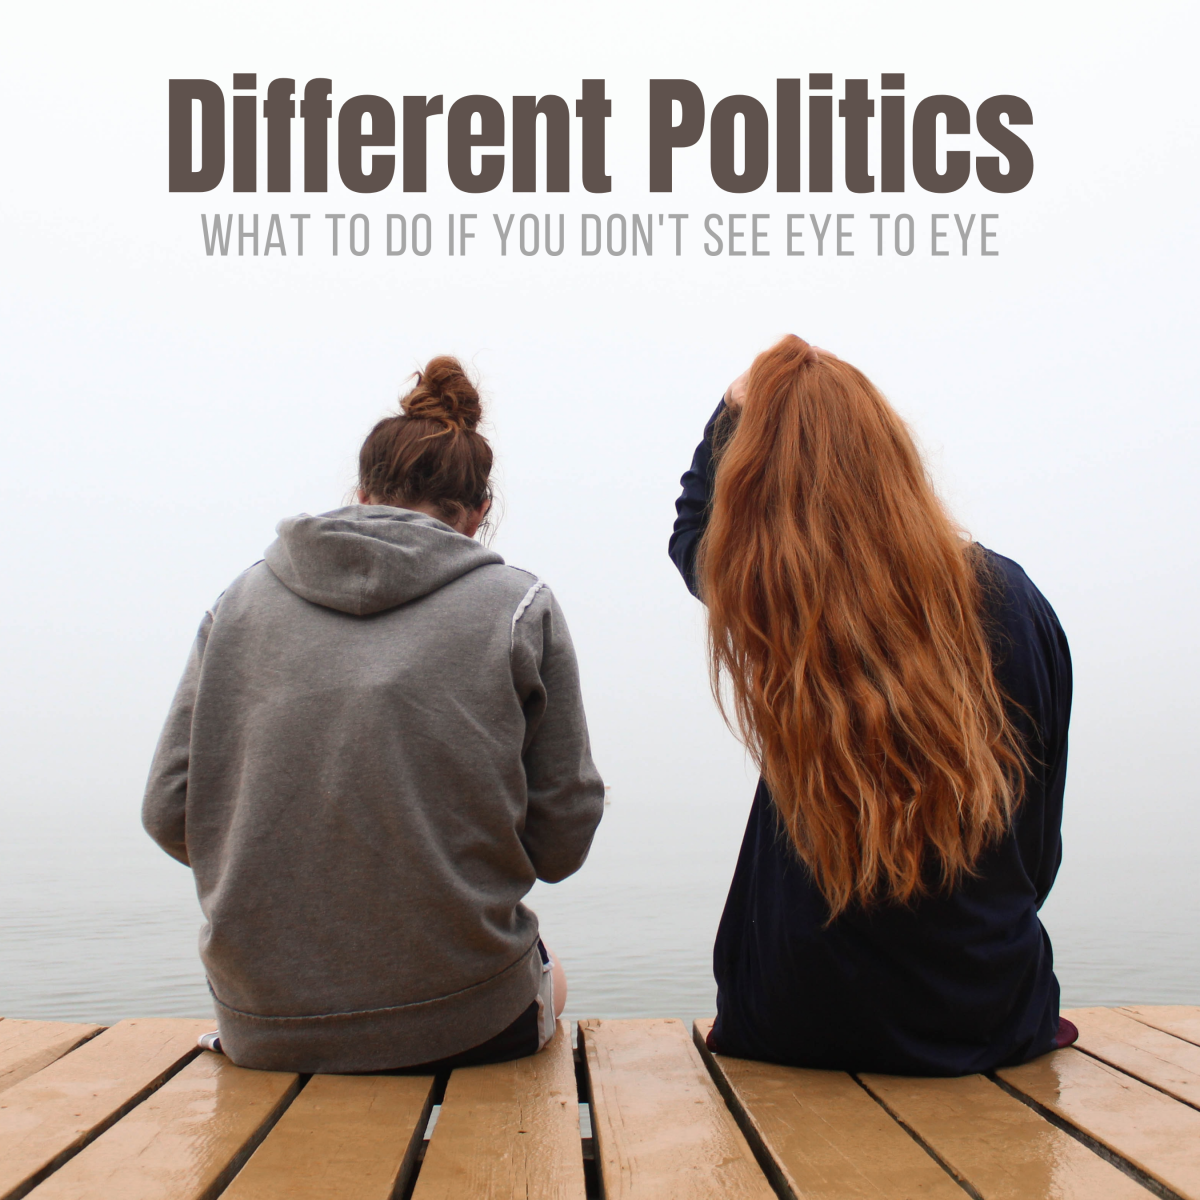 What to Do When Your Friend Has Different Political Views